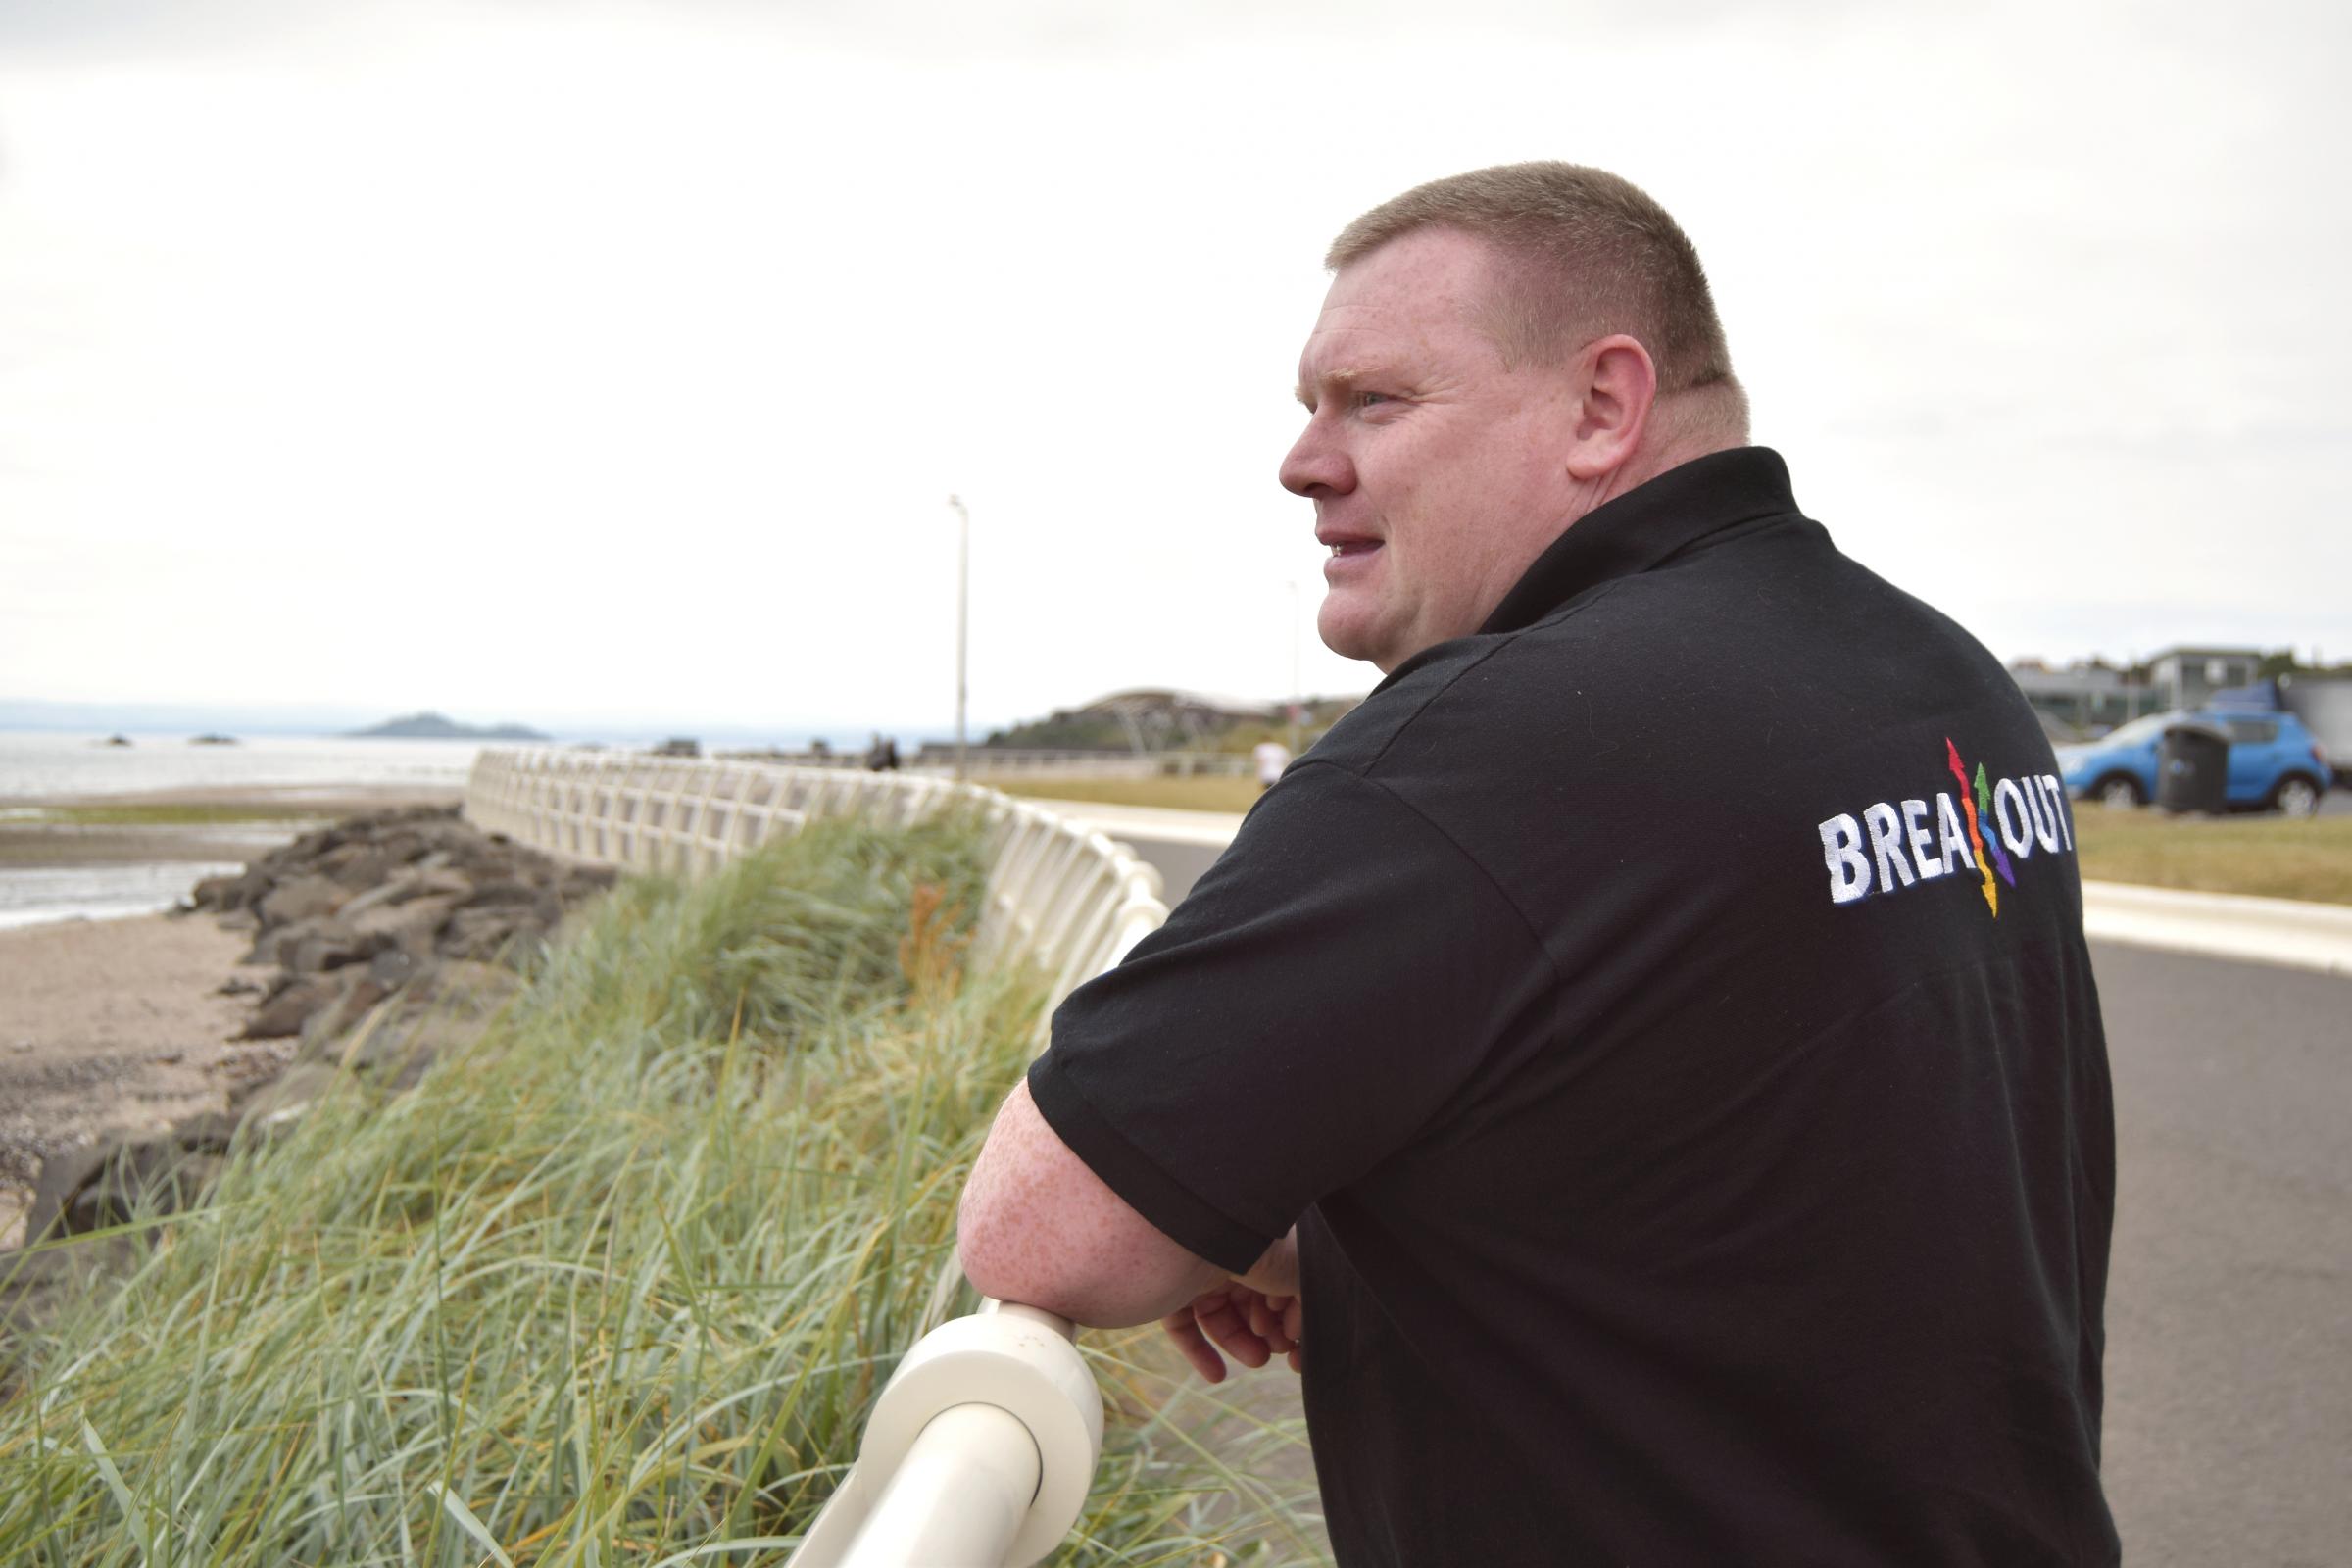 Kirkcaldy set to welcome Breakout to the Promenade